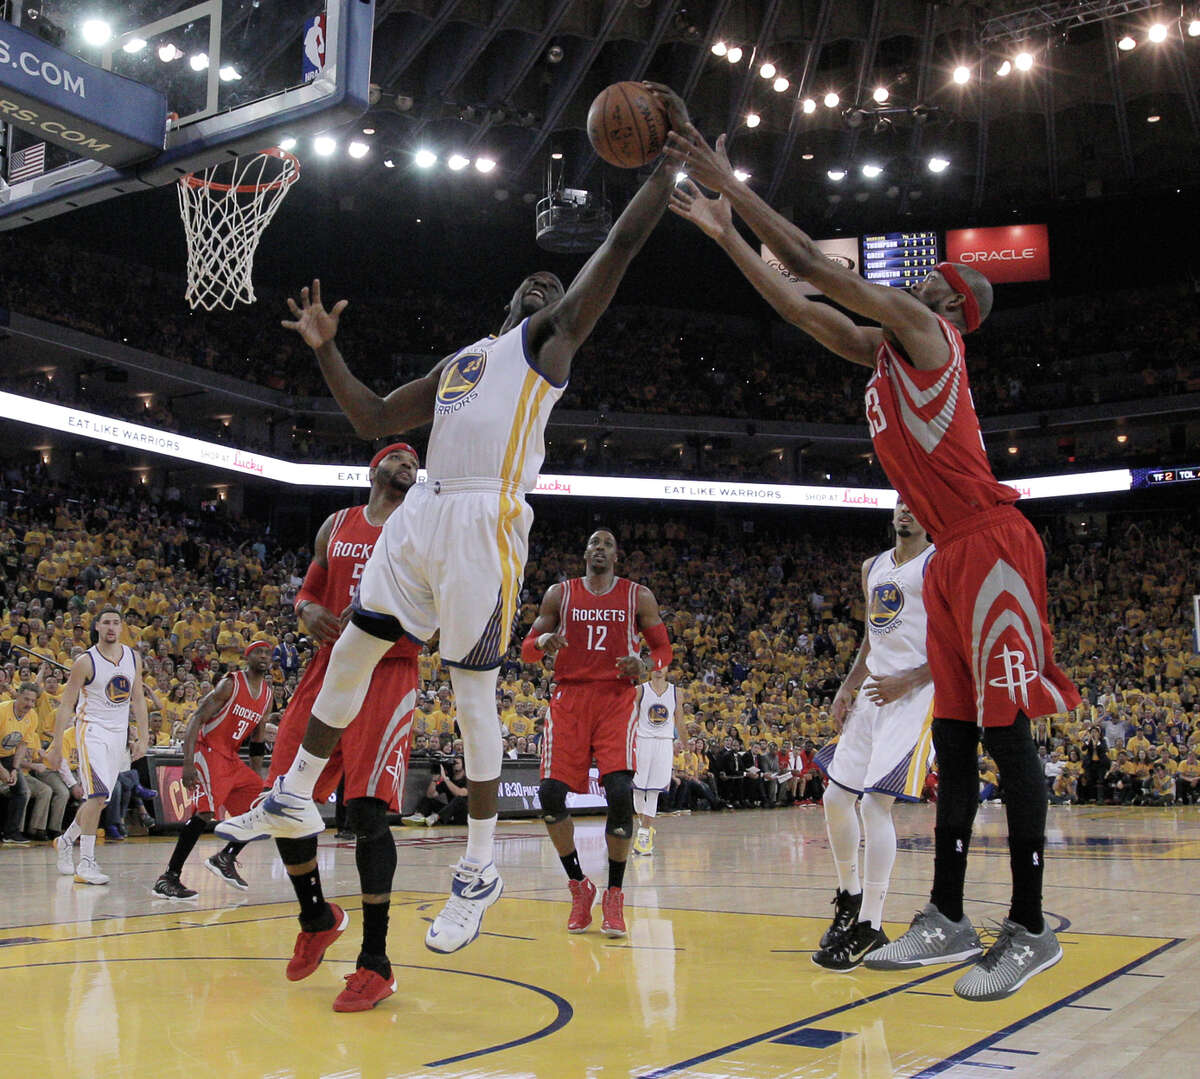 Warrior Draymond Green (23) and Rockets Corey Brewer go after a rebound during Game 1 of the Western Conference Finals on Tuesday, May 19, 2015 in Oakland, Calif.